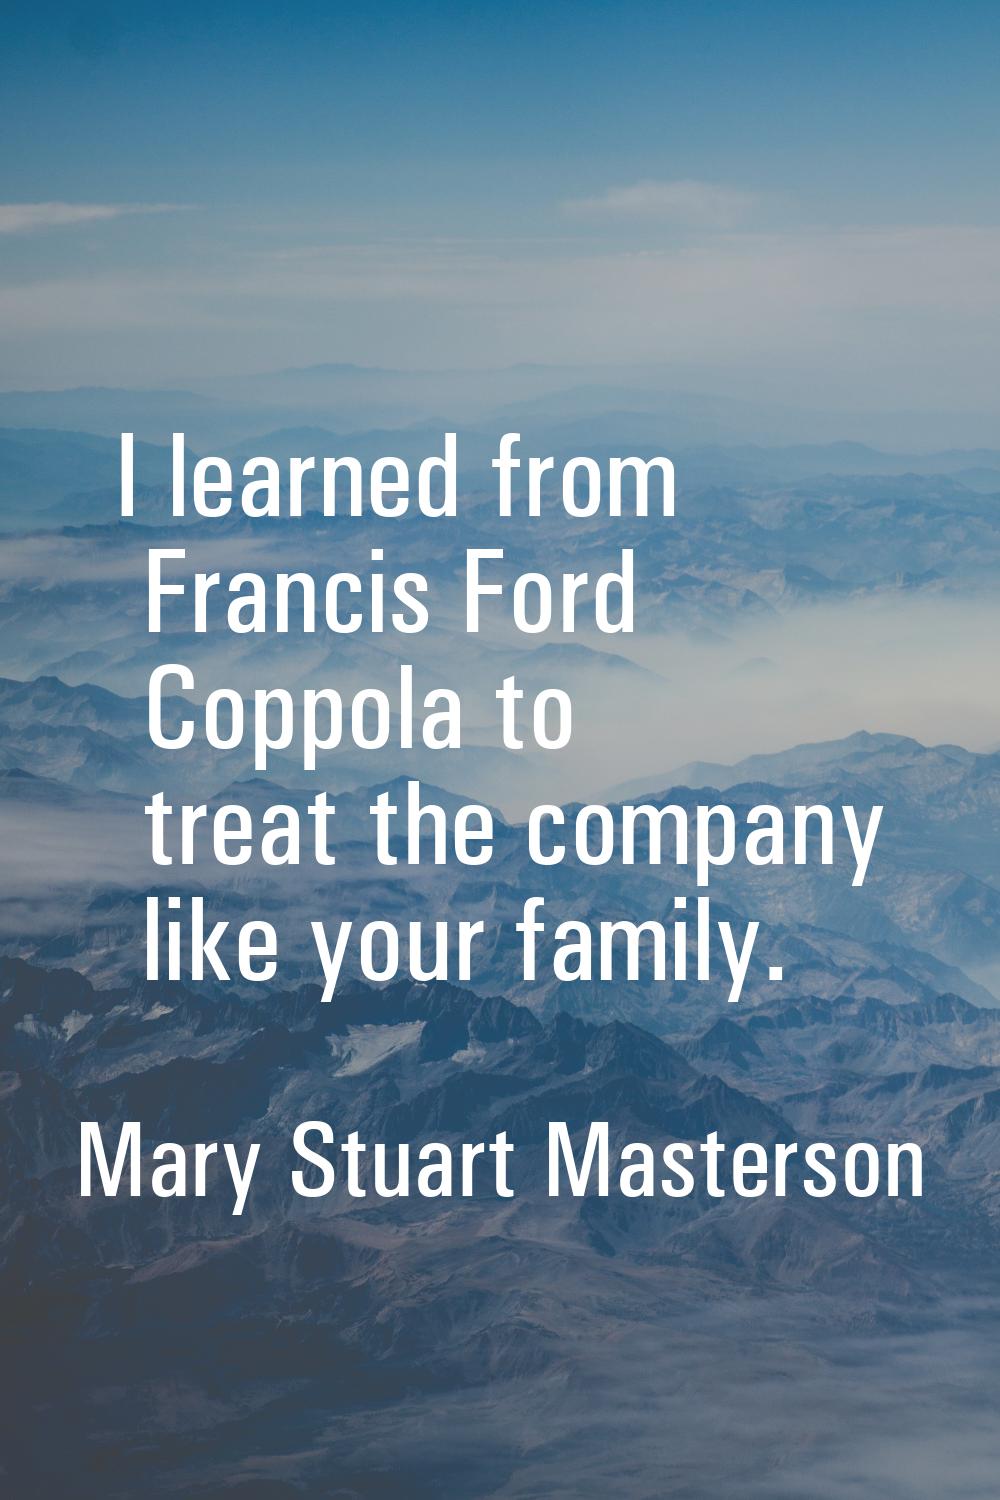 I learned from Francis Ford Coppola to treat the company like your family.